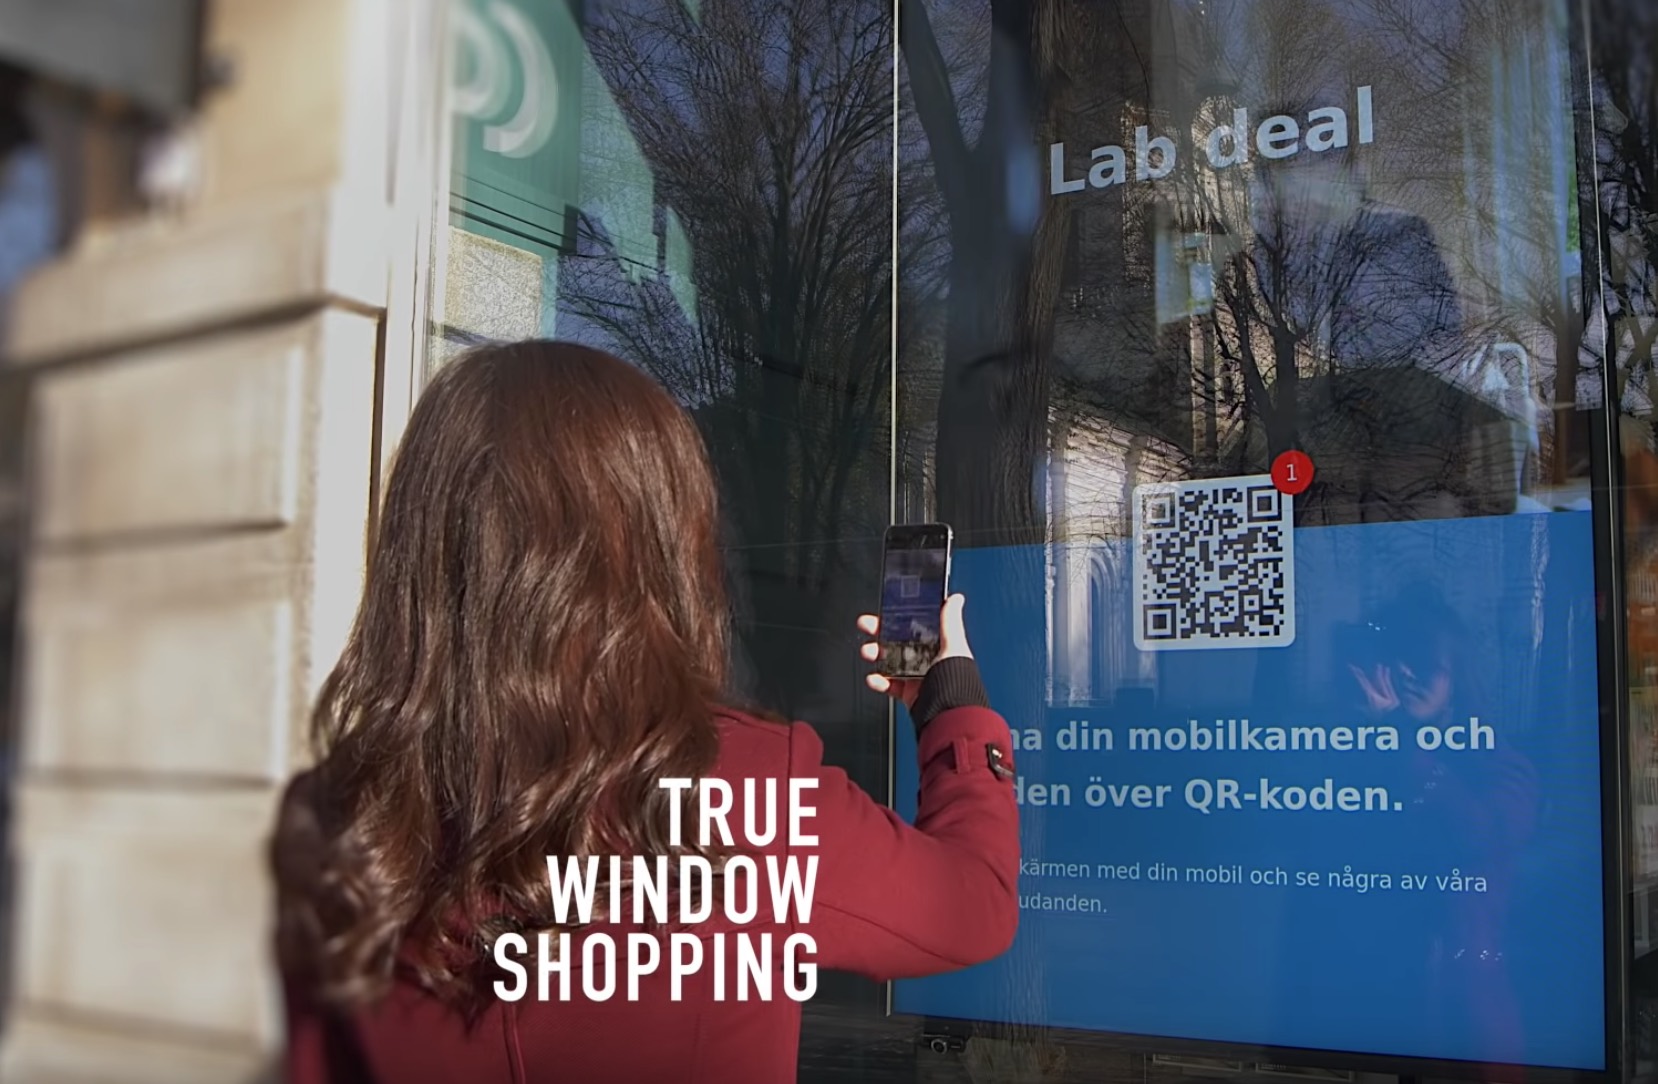 Interact with digital signage from outside the building